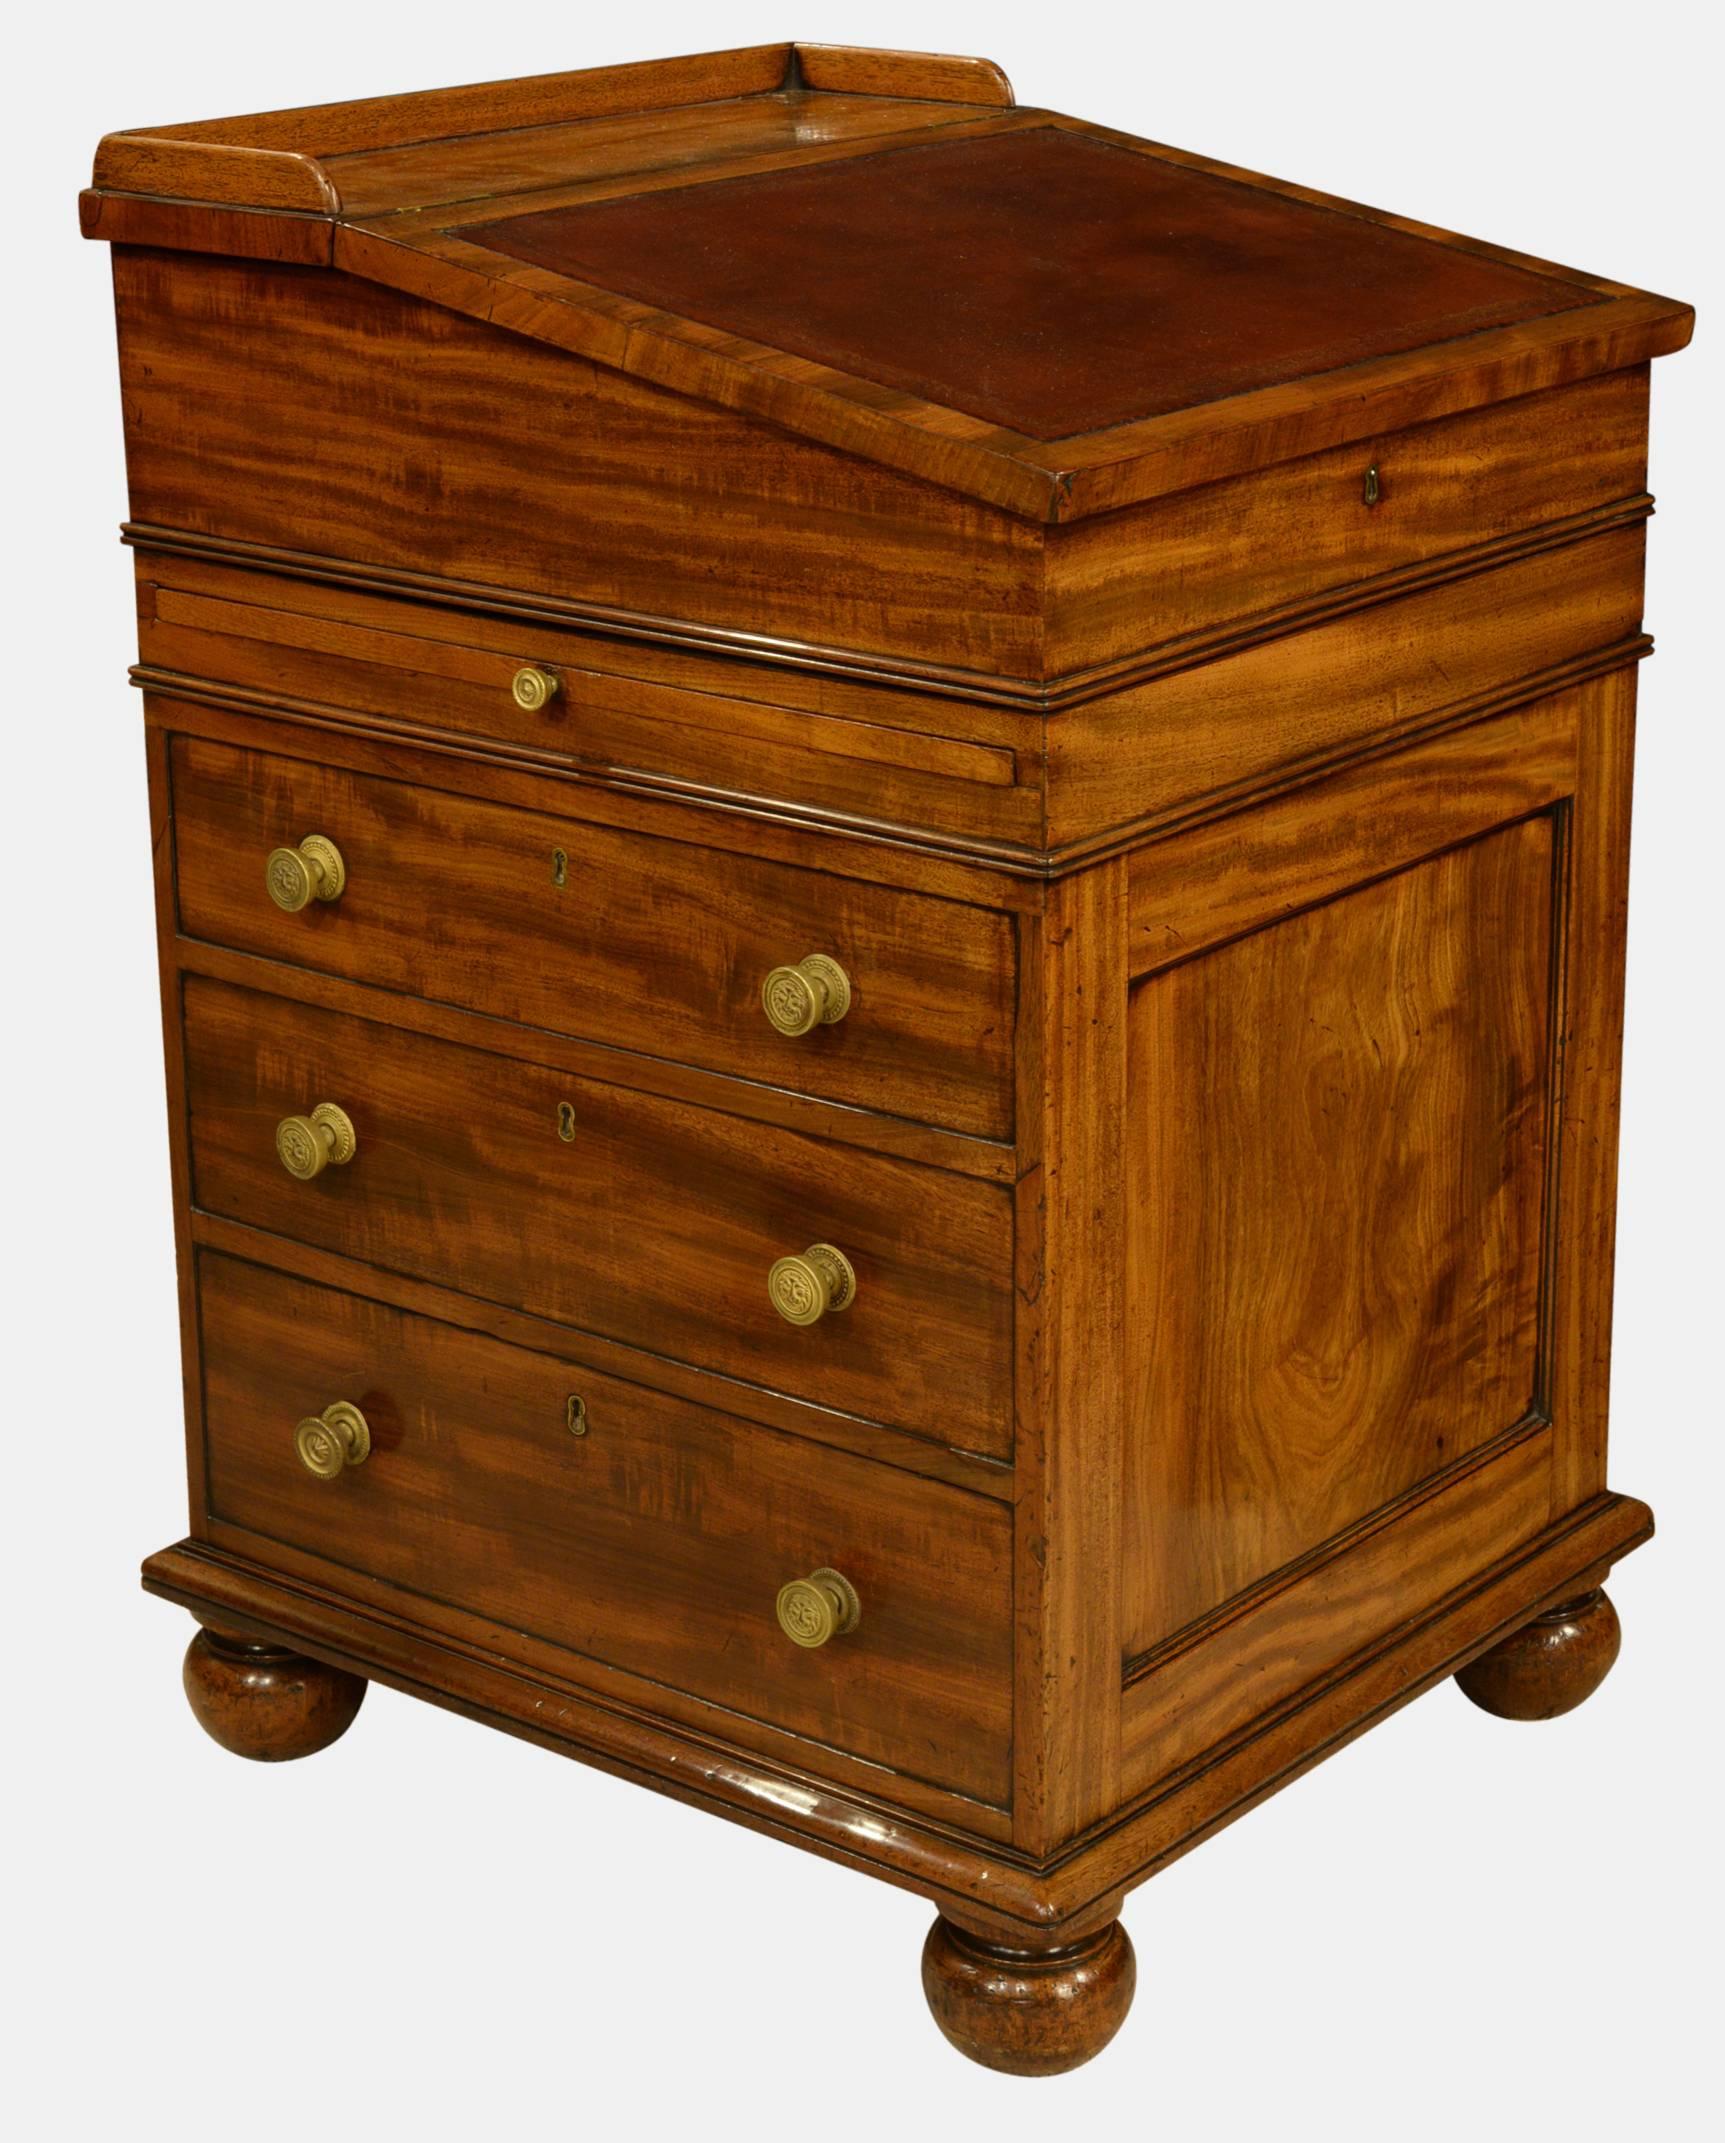 An early 19th century mahogany slide top Davenport in the manner of Gillows. With pull-out pen drawer, two brushing slides and three drawers,

circa 1840.